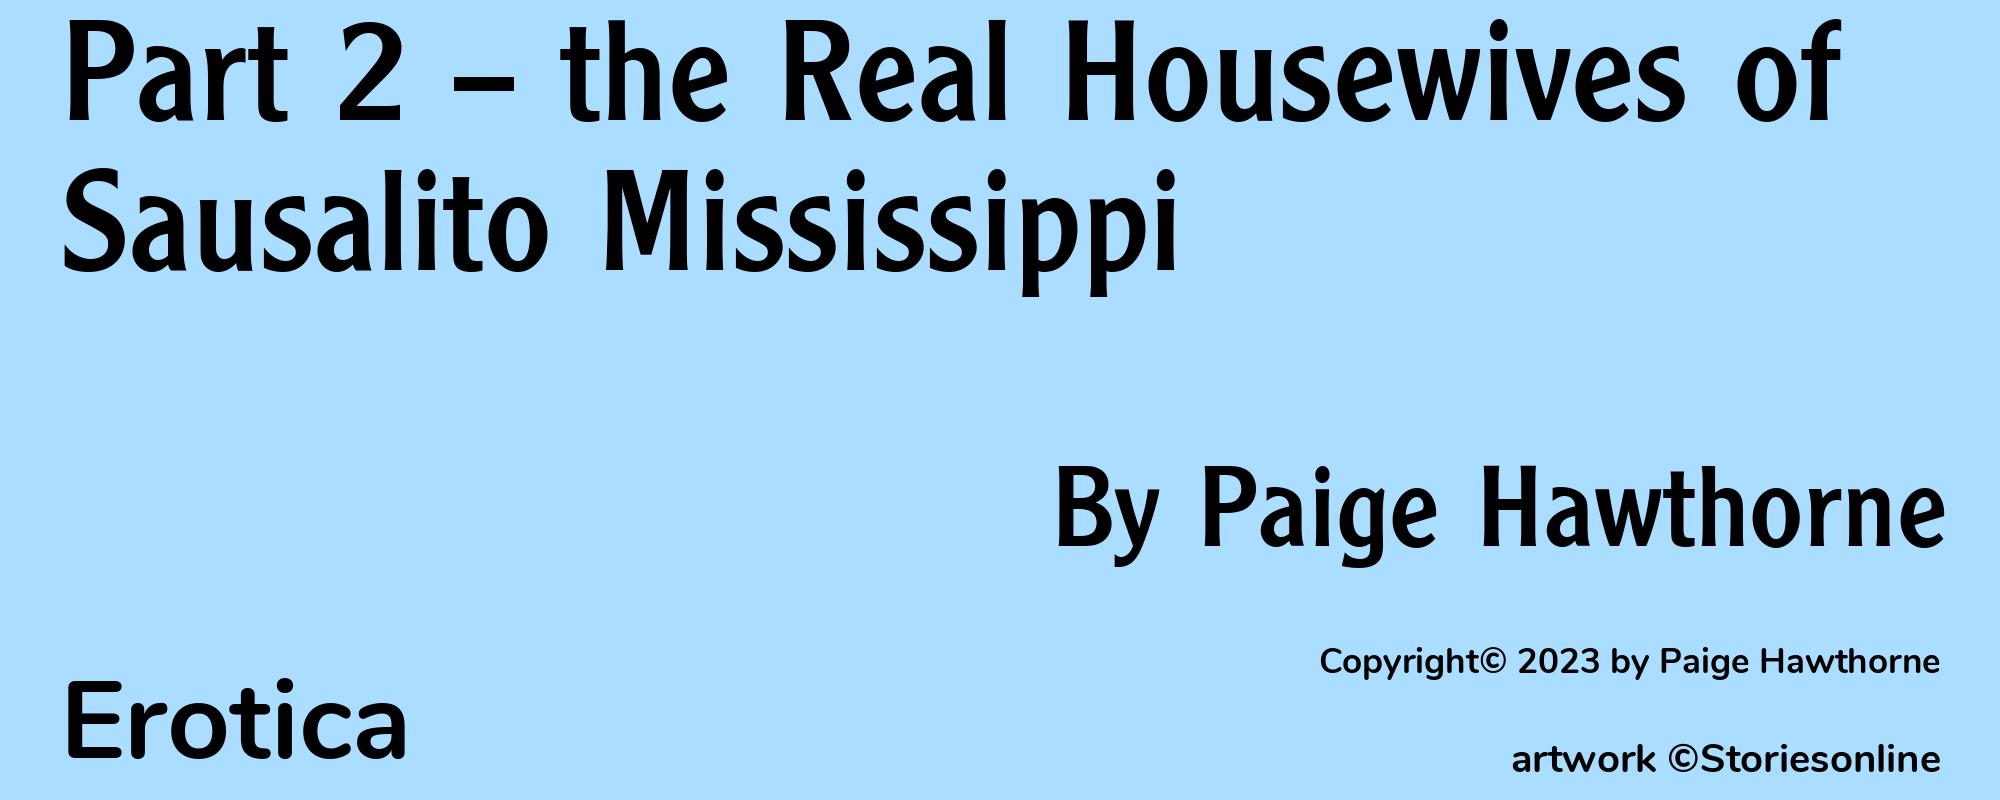 Part 2 -- the Real Housewives of Sausalito Mississippi - Cover